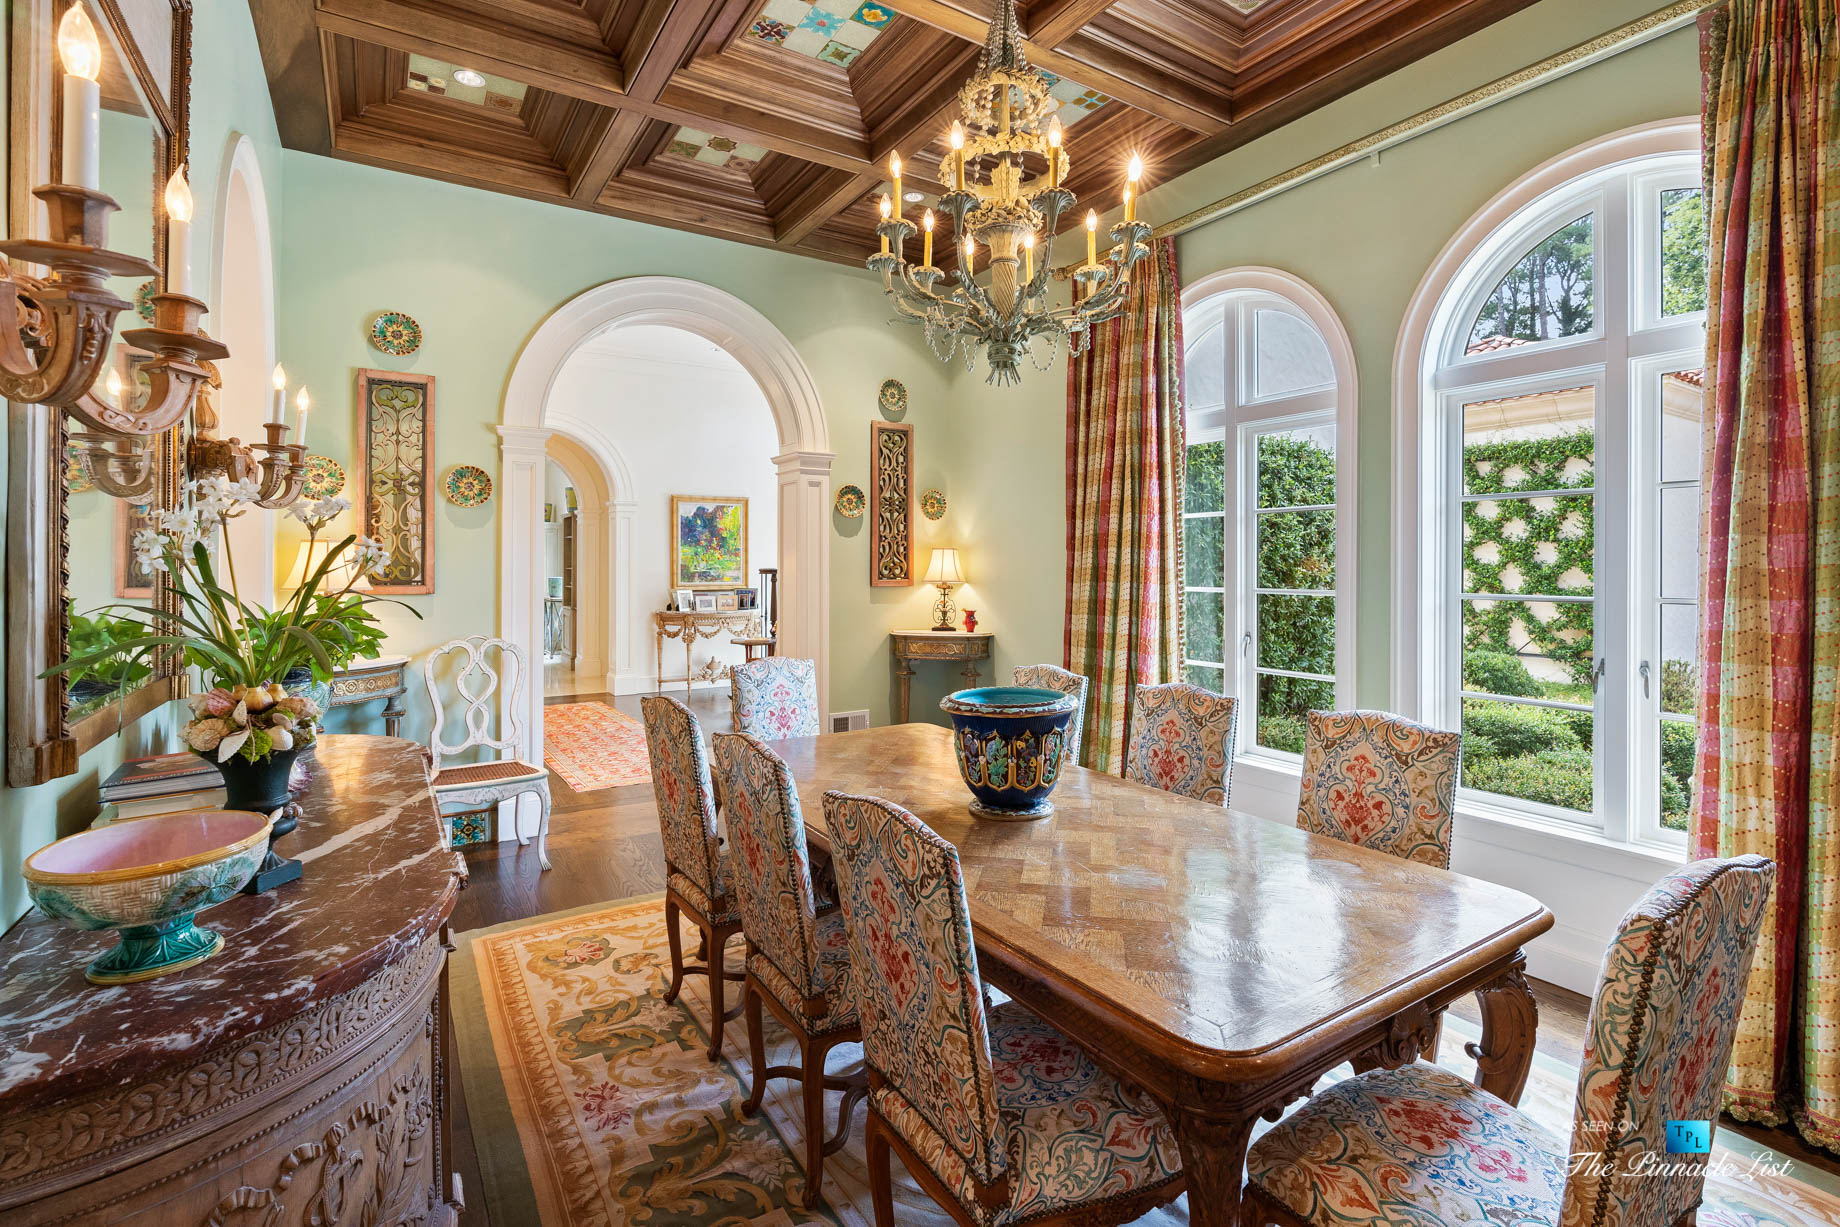 439 Blackland Rd NW, Atlanta, GA, USA - Dining Room with Wood Ceiling - Luxury Real Estate - Tuxedo Park Mediterranean Mansion Home